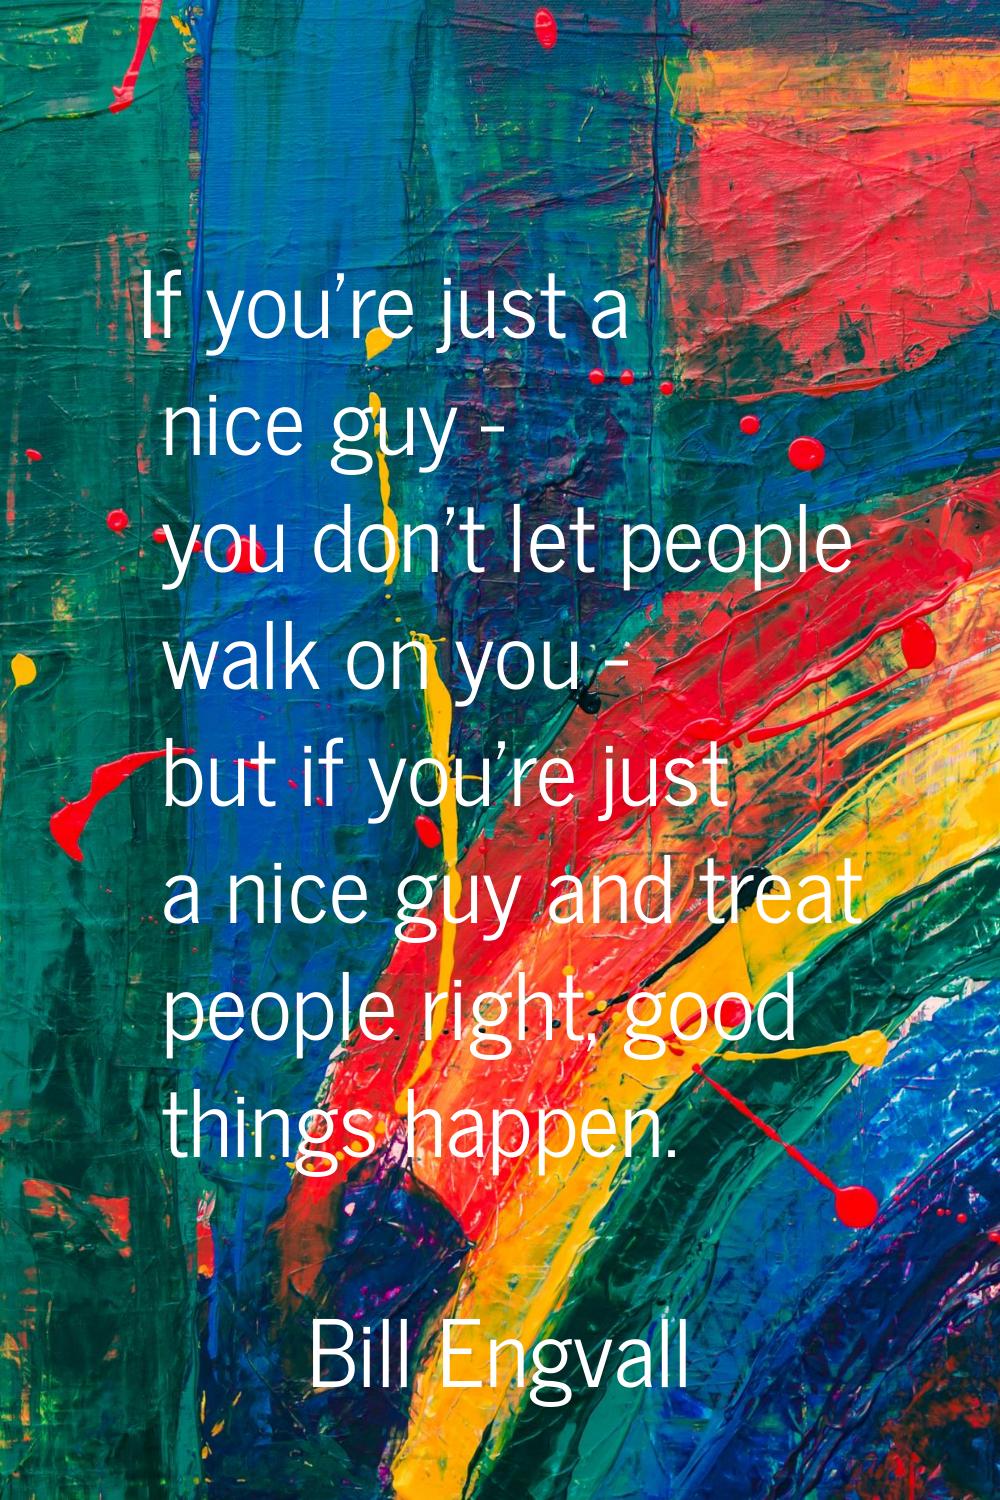 If you're just a nice guy - you don't let people walk on you - but if you're just a nice guy and tr